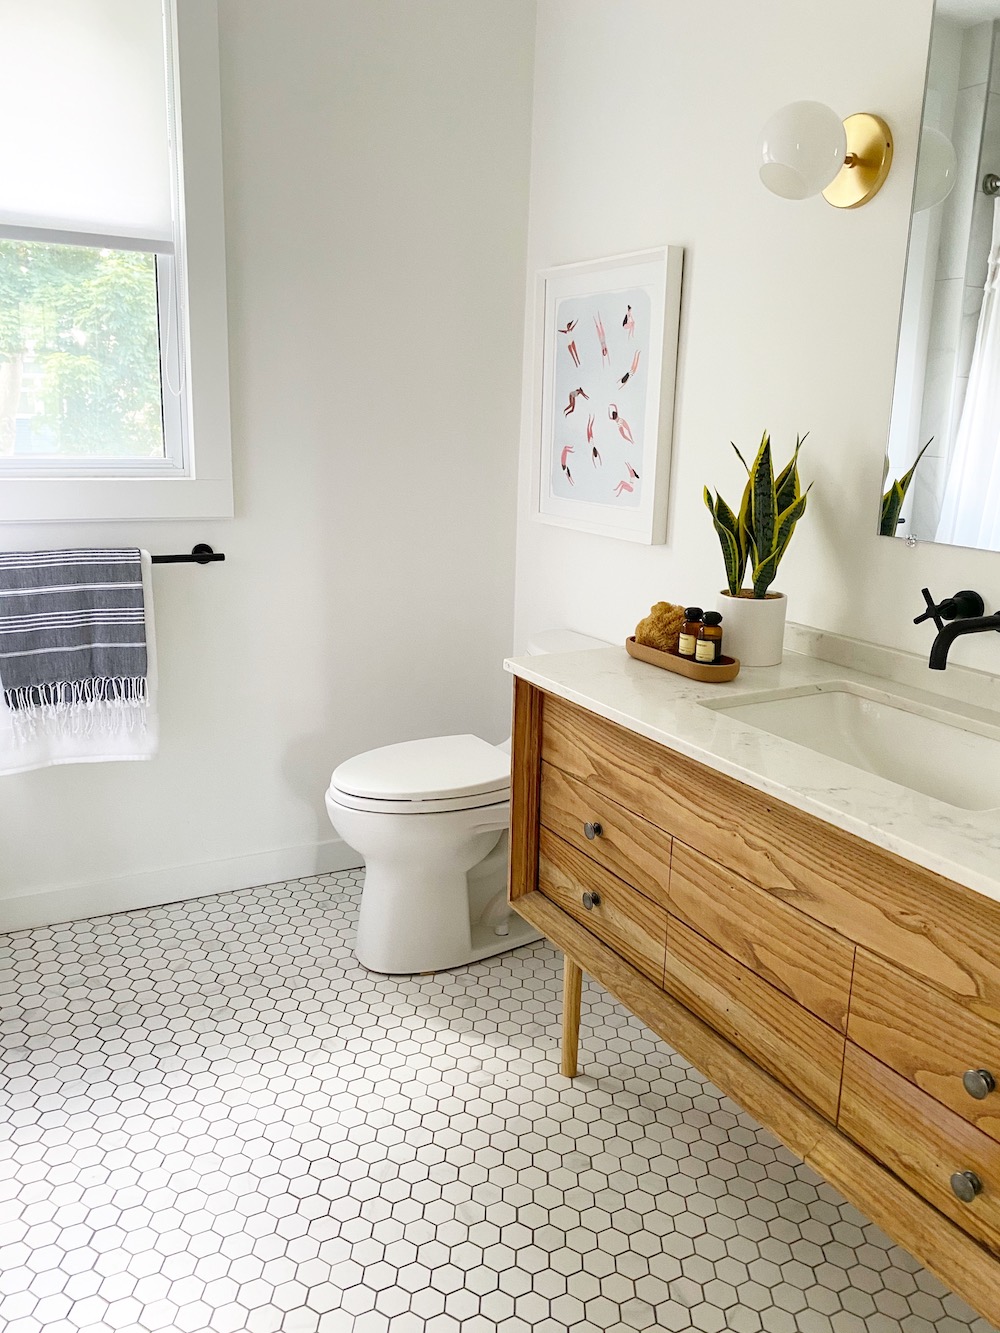 Beautiful white bathroom designed and styled by The Property Stylist Inc. with a wooden vanity, undermounted sink, black hardware, white hexagon tile floors, and a white toilet